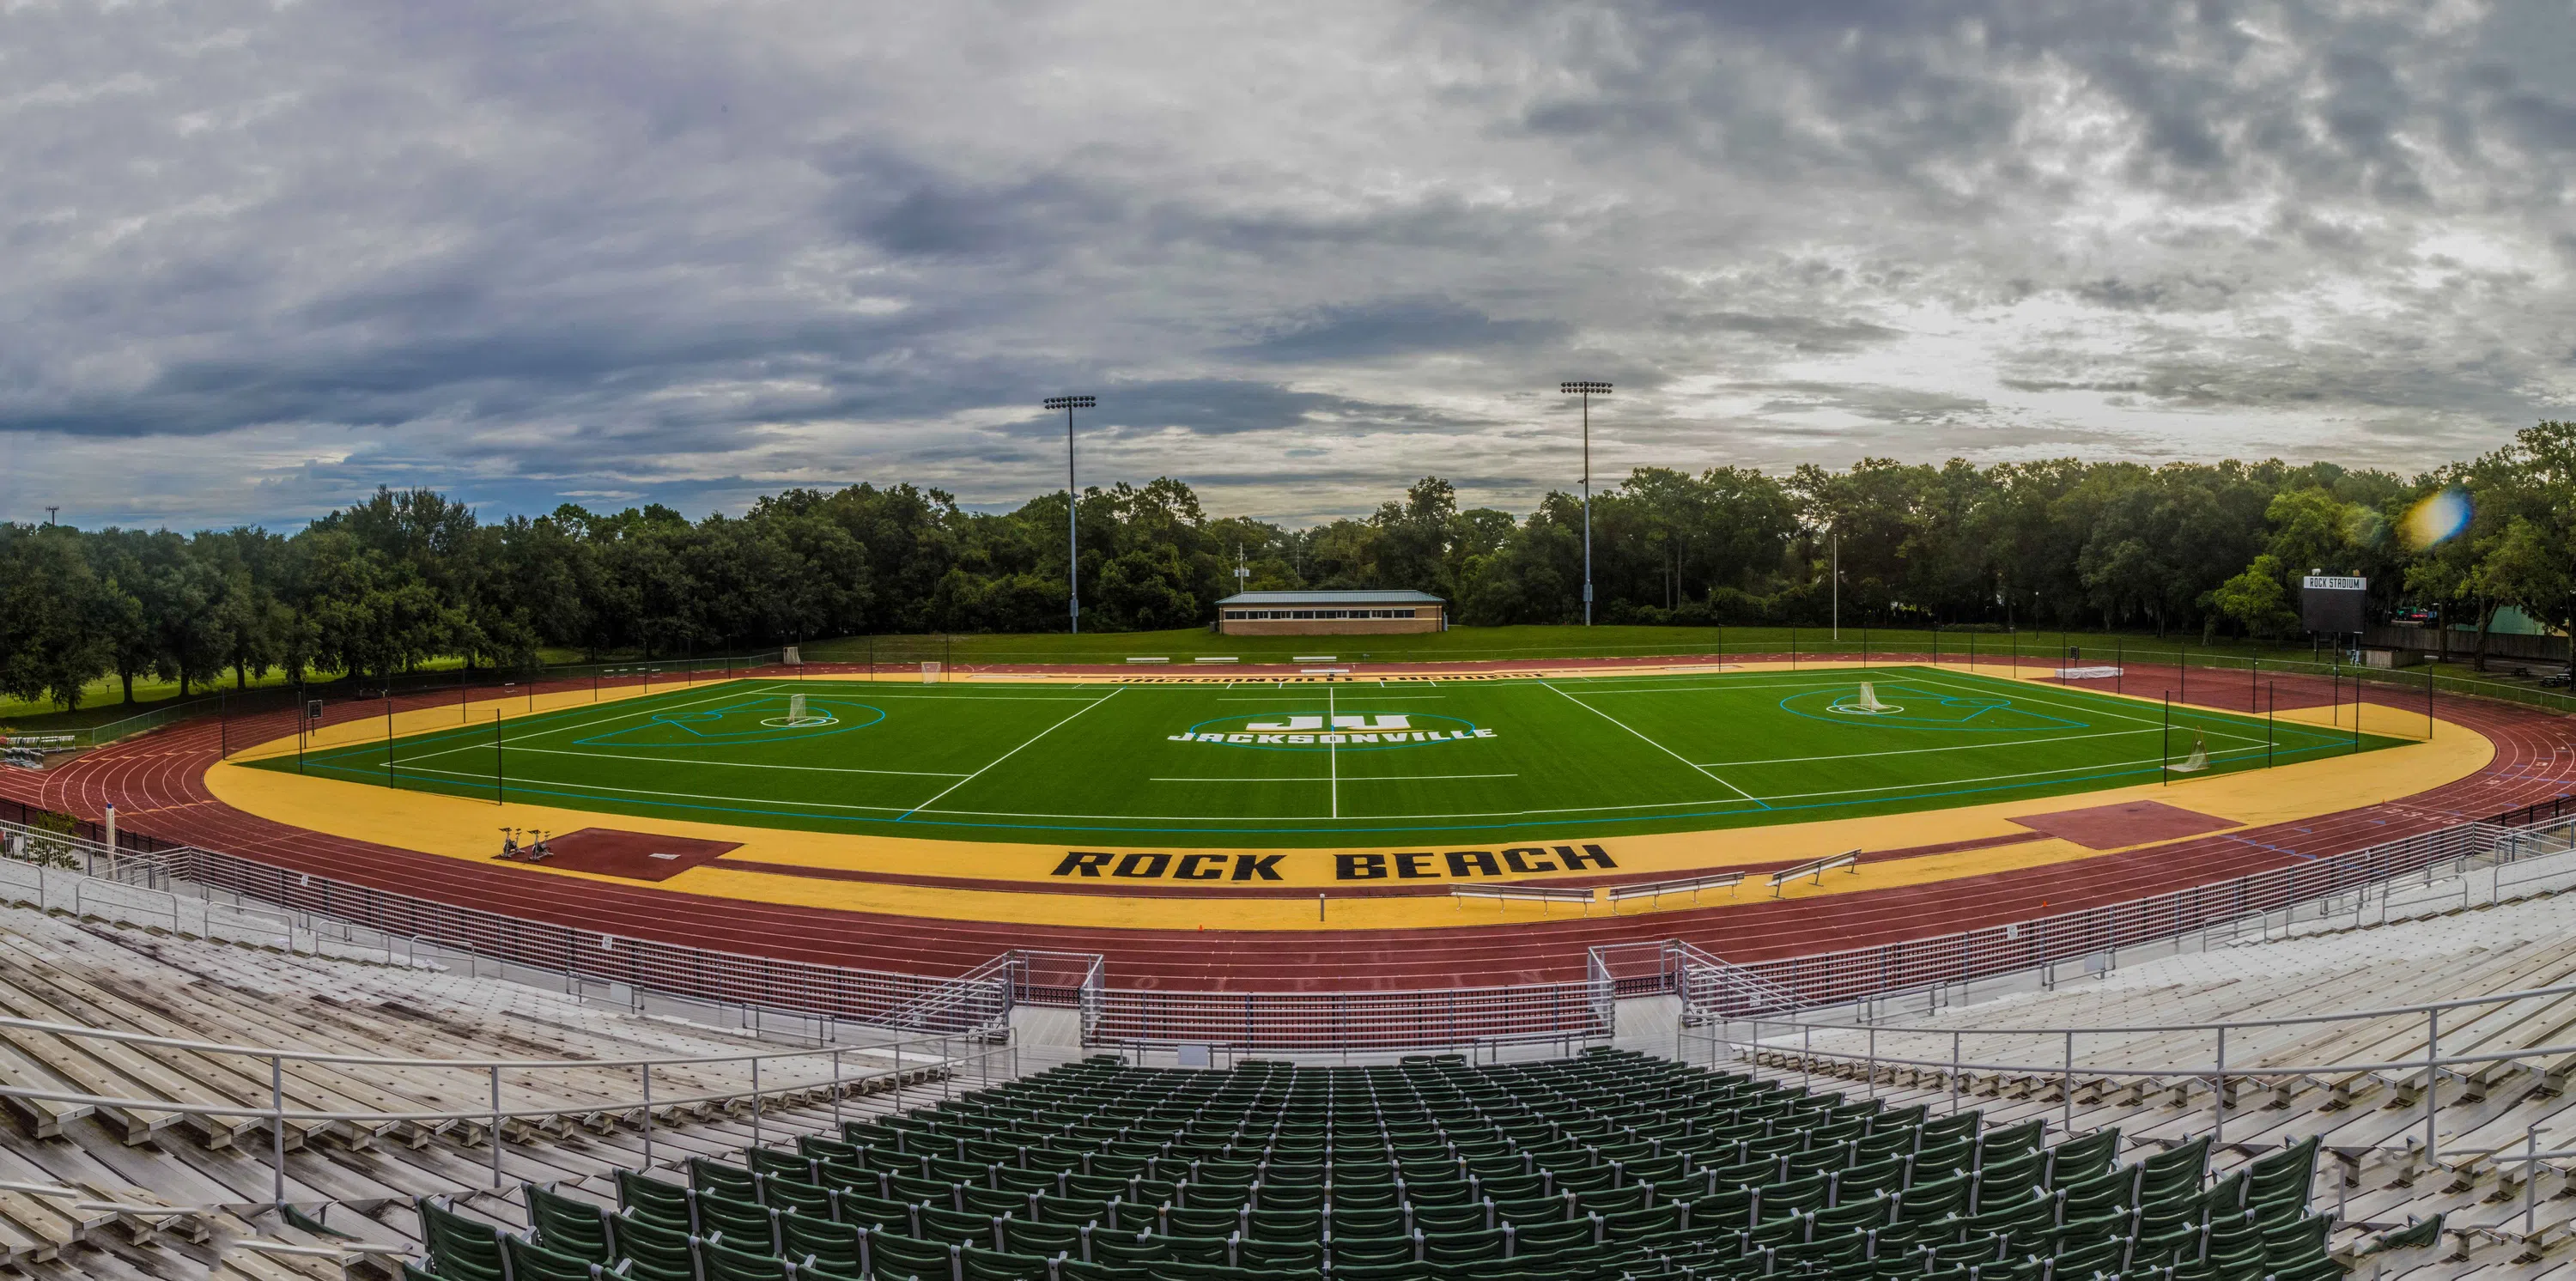 Rock Stadium is home to our men's and women's lacrosse teams. 